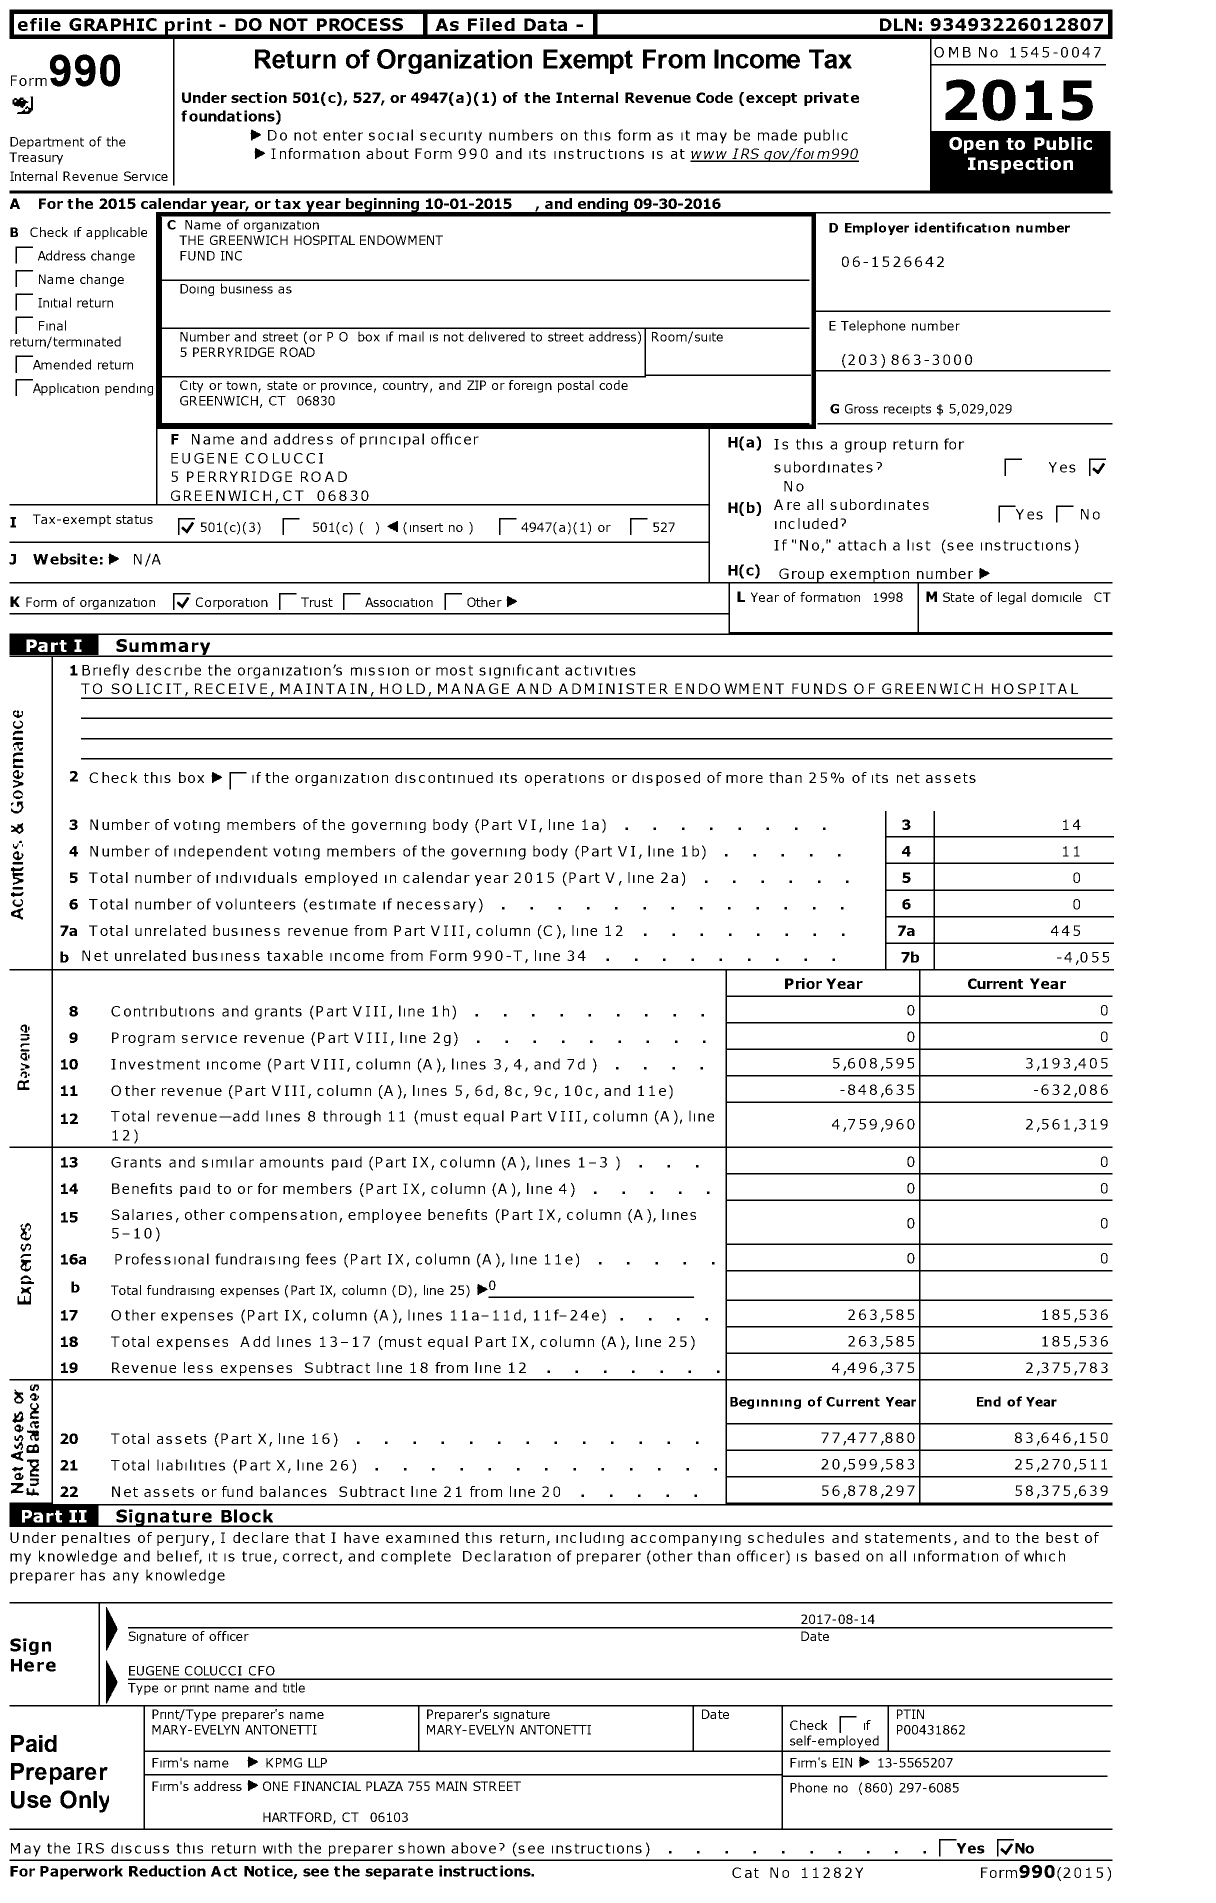 Image of first page of 2015 Form 990 for The Greenwich Hospital Endowment Fund